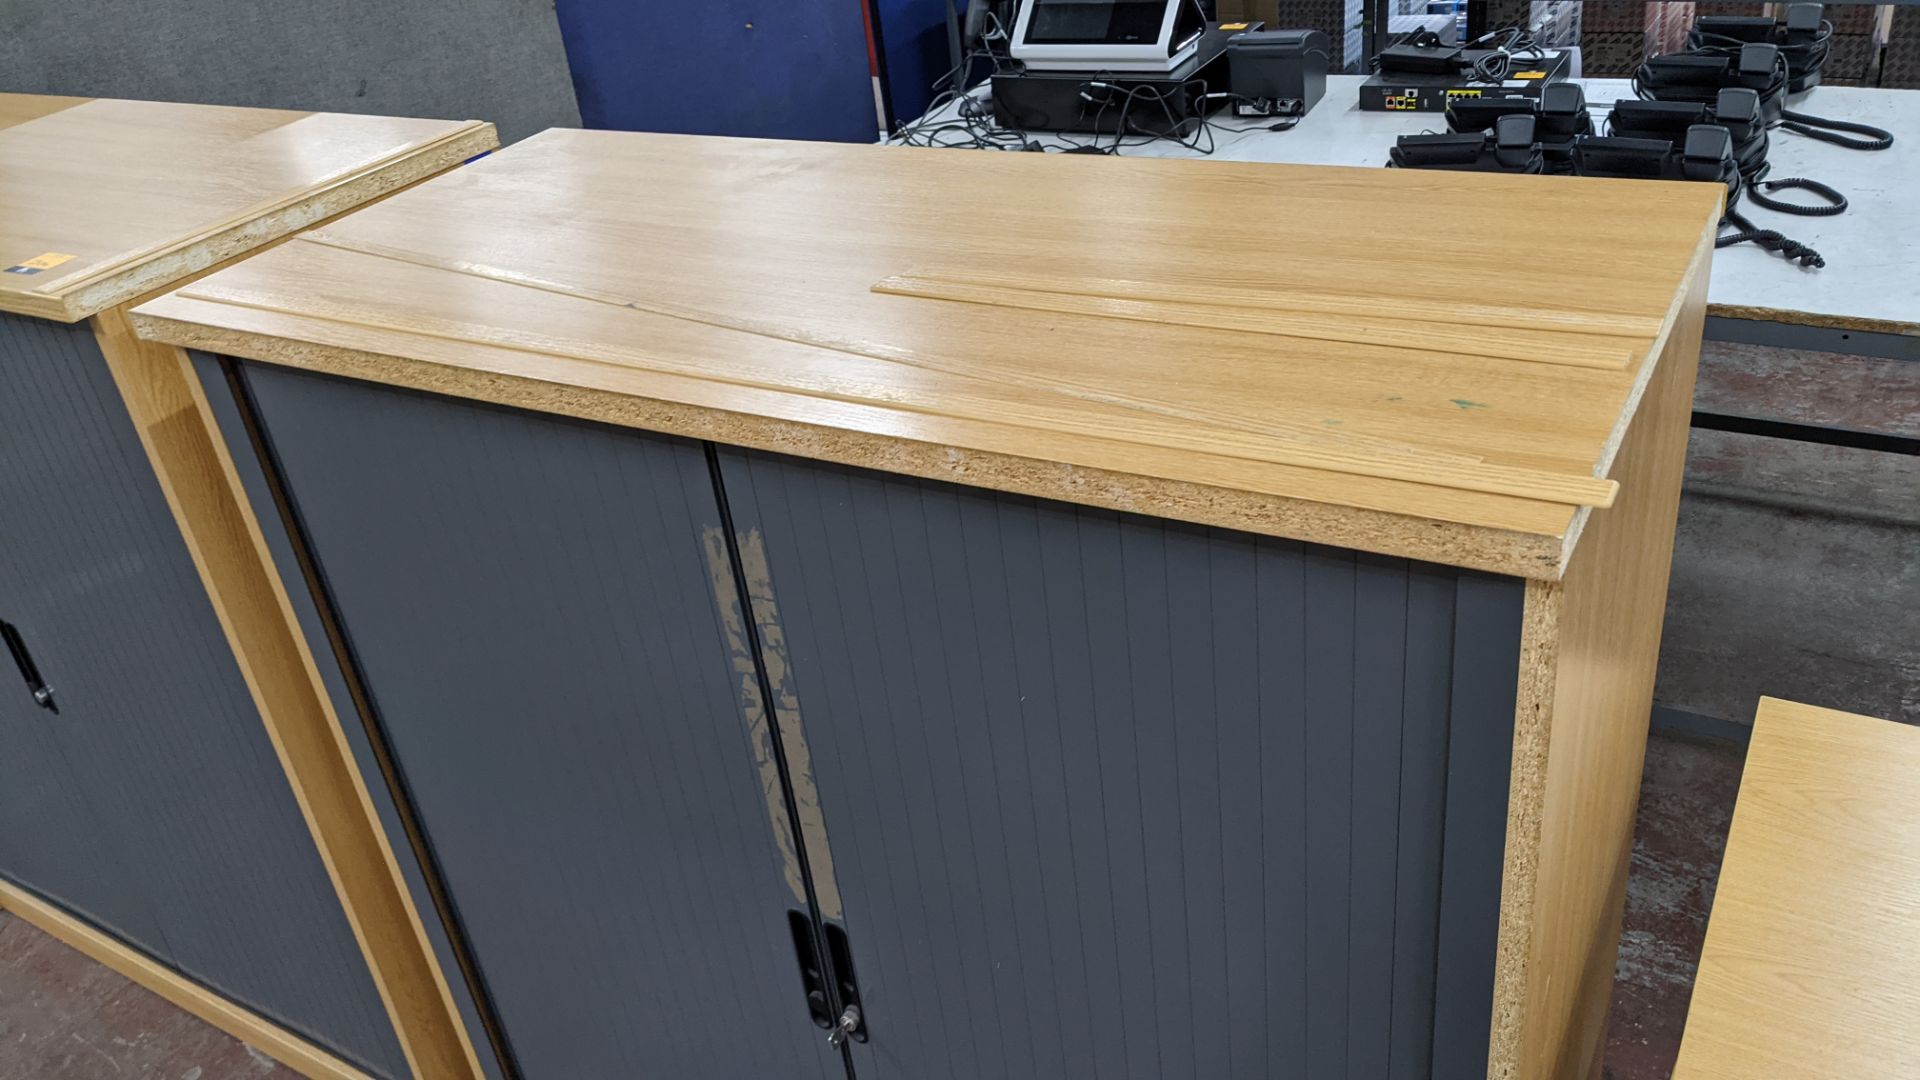 2 off tambour front office cupboards - Image 6 of 9